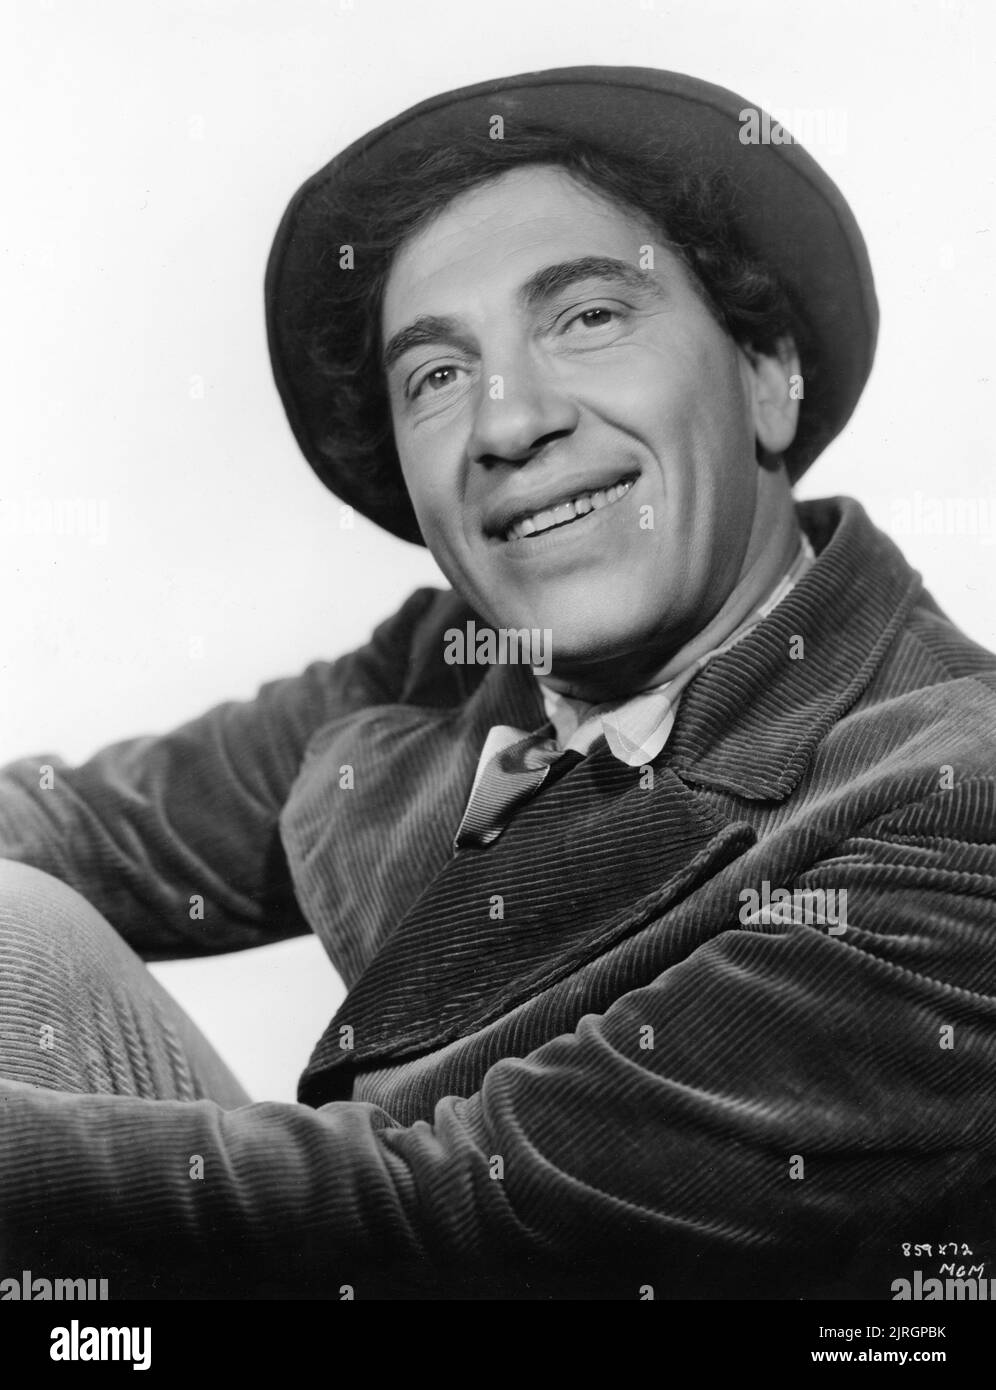 CHICO MARX Portrait by CLARENCE SINCLAIR BULL in A NIGHT AT THE OPERA 1935 director SAM WOOD writers George S. Kaufman and Morrie Ryskind producer Irving Thalberg Metro Goldwyn Mayer Stock Photo